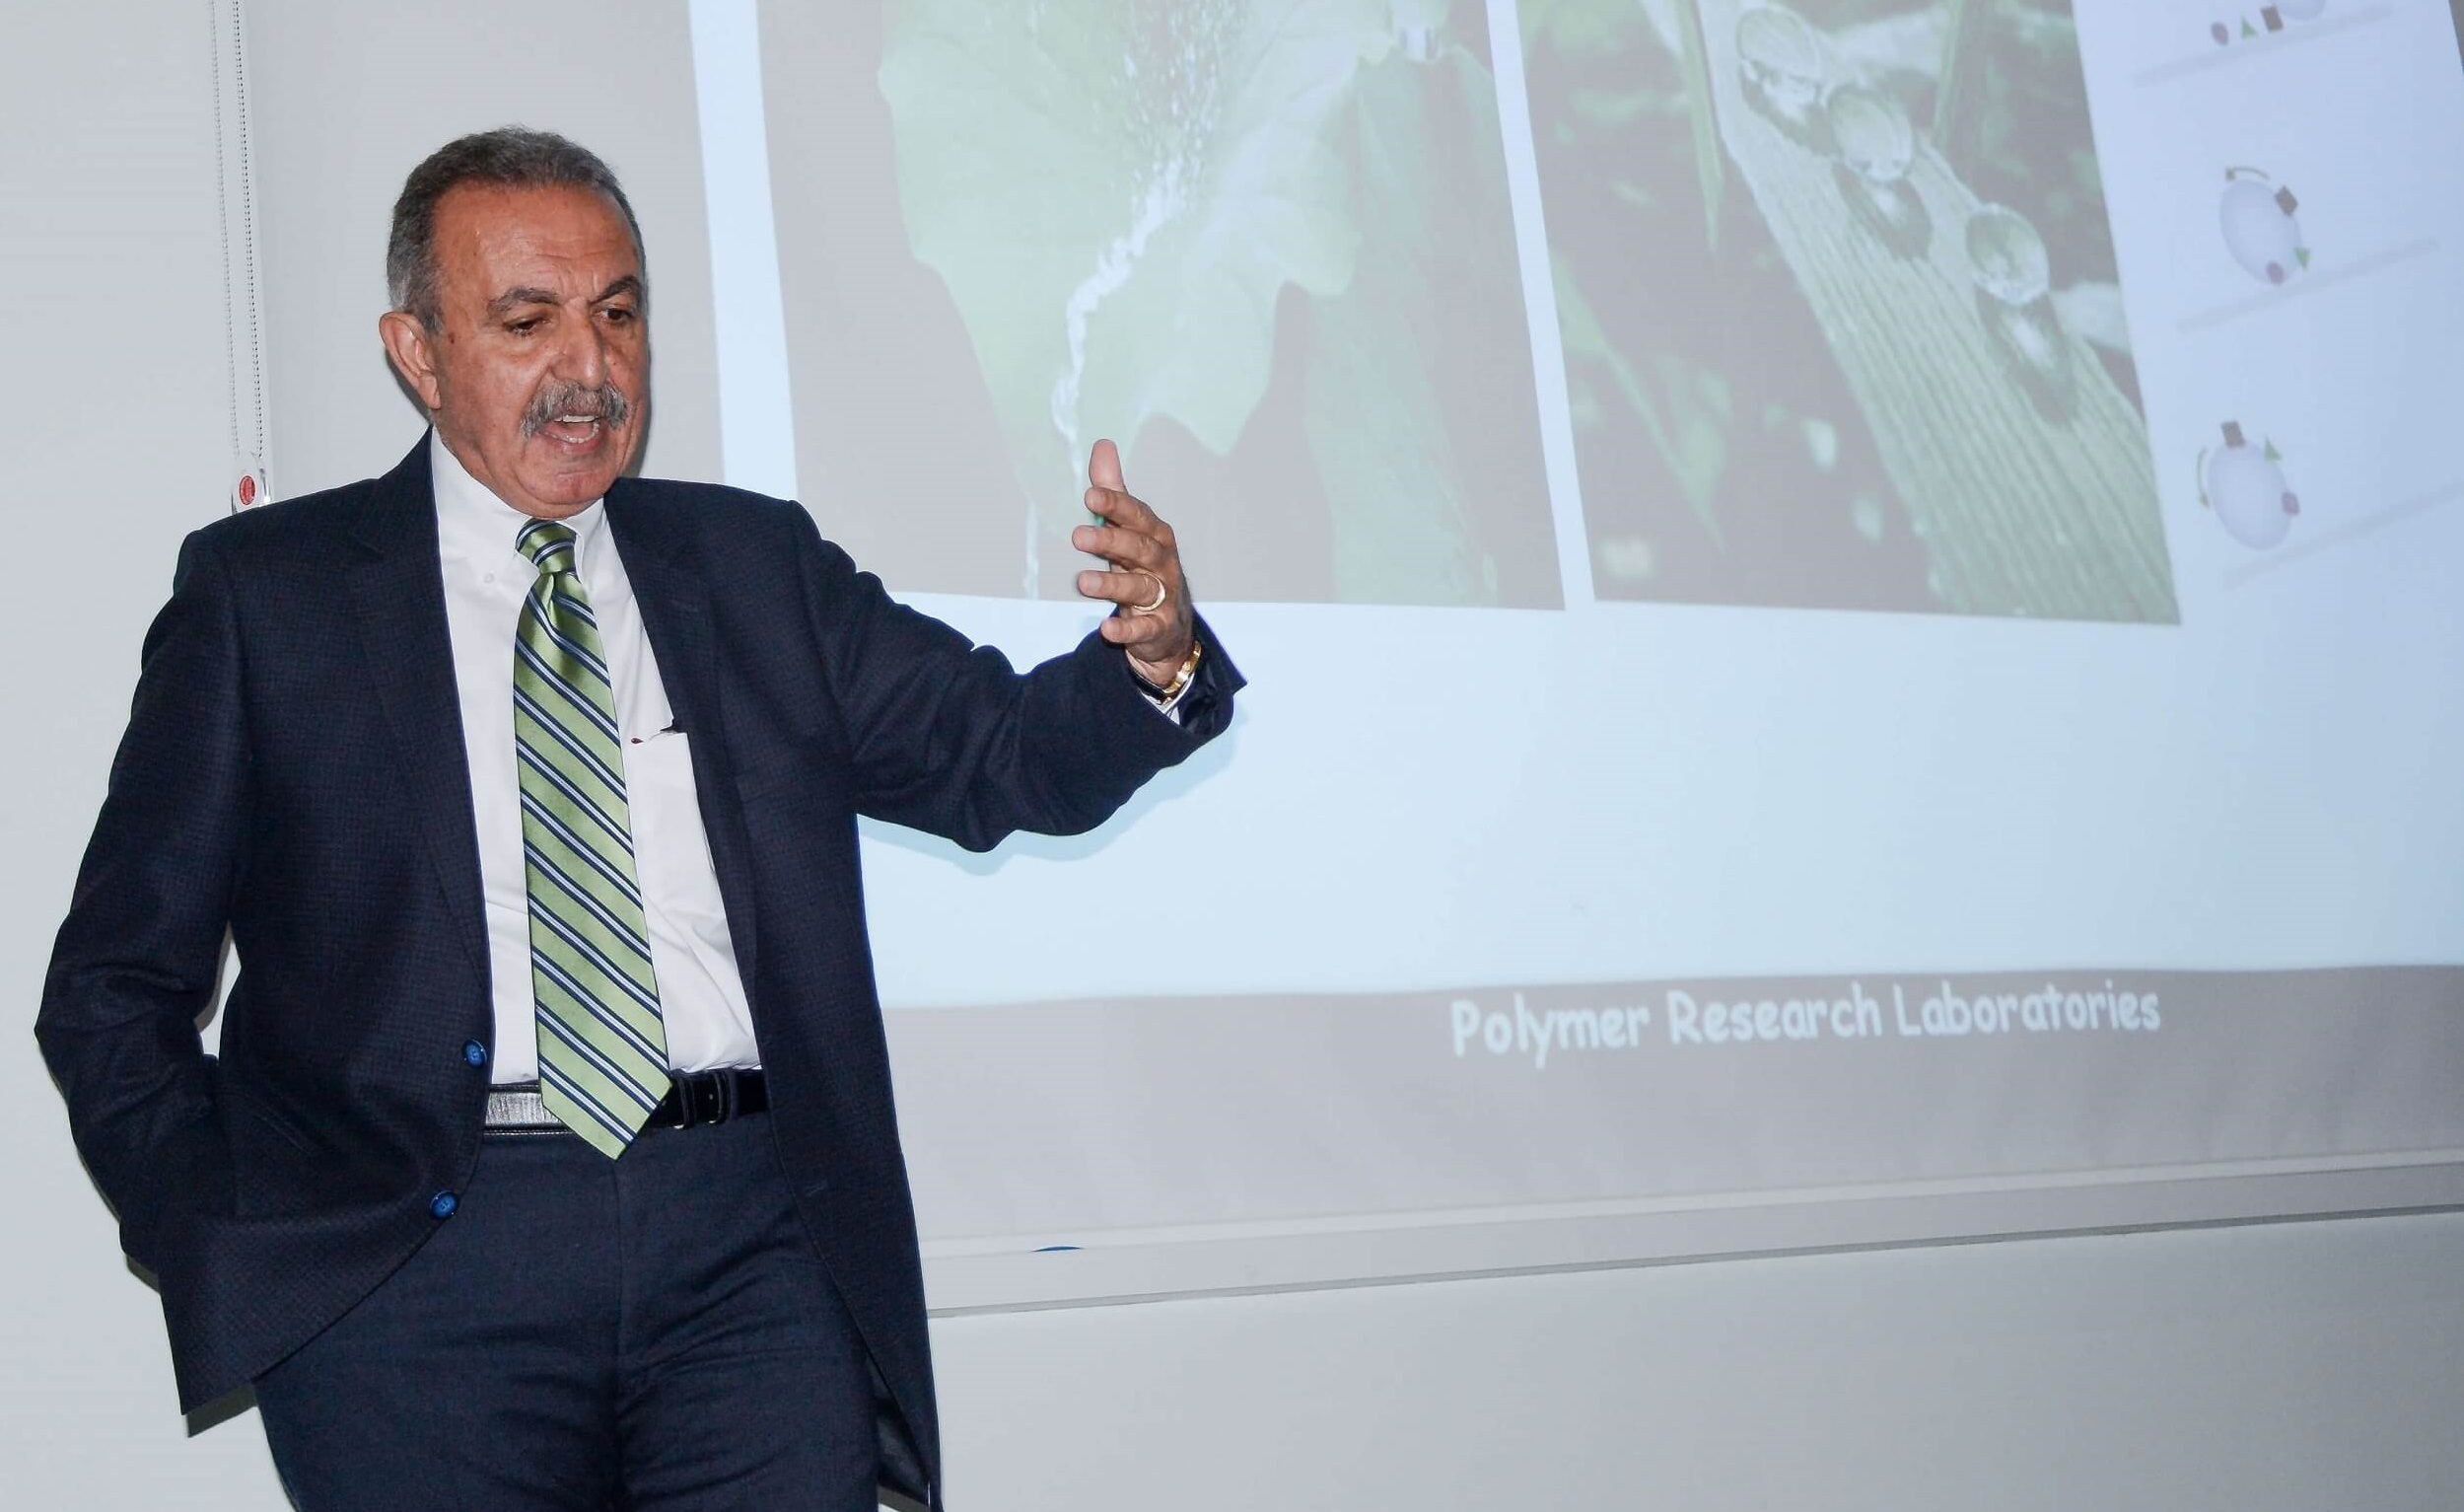 Organized by Near East University, Conference Series on ‘100 Reasons to Produce Science’ hosted Prof. Dr. İskender YILGÖR who is one of the world’s forerunners of studies on Polymers